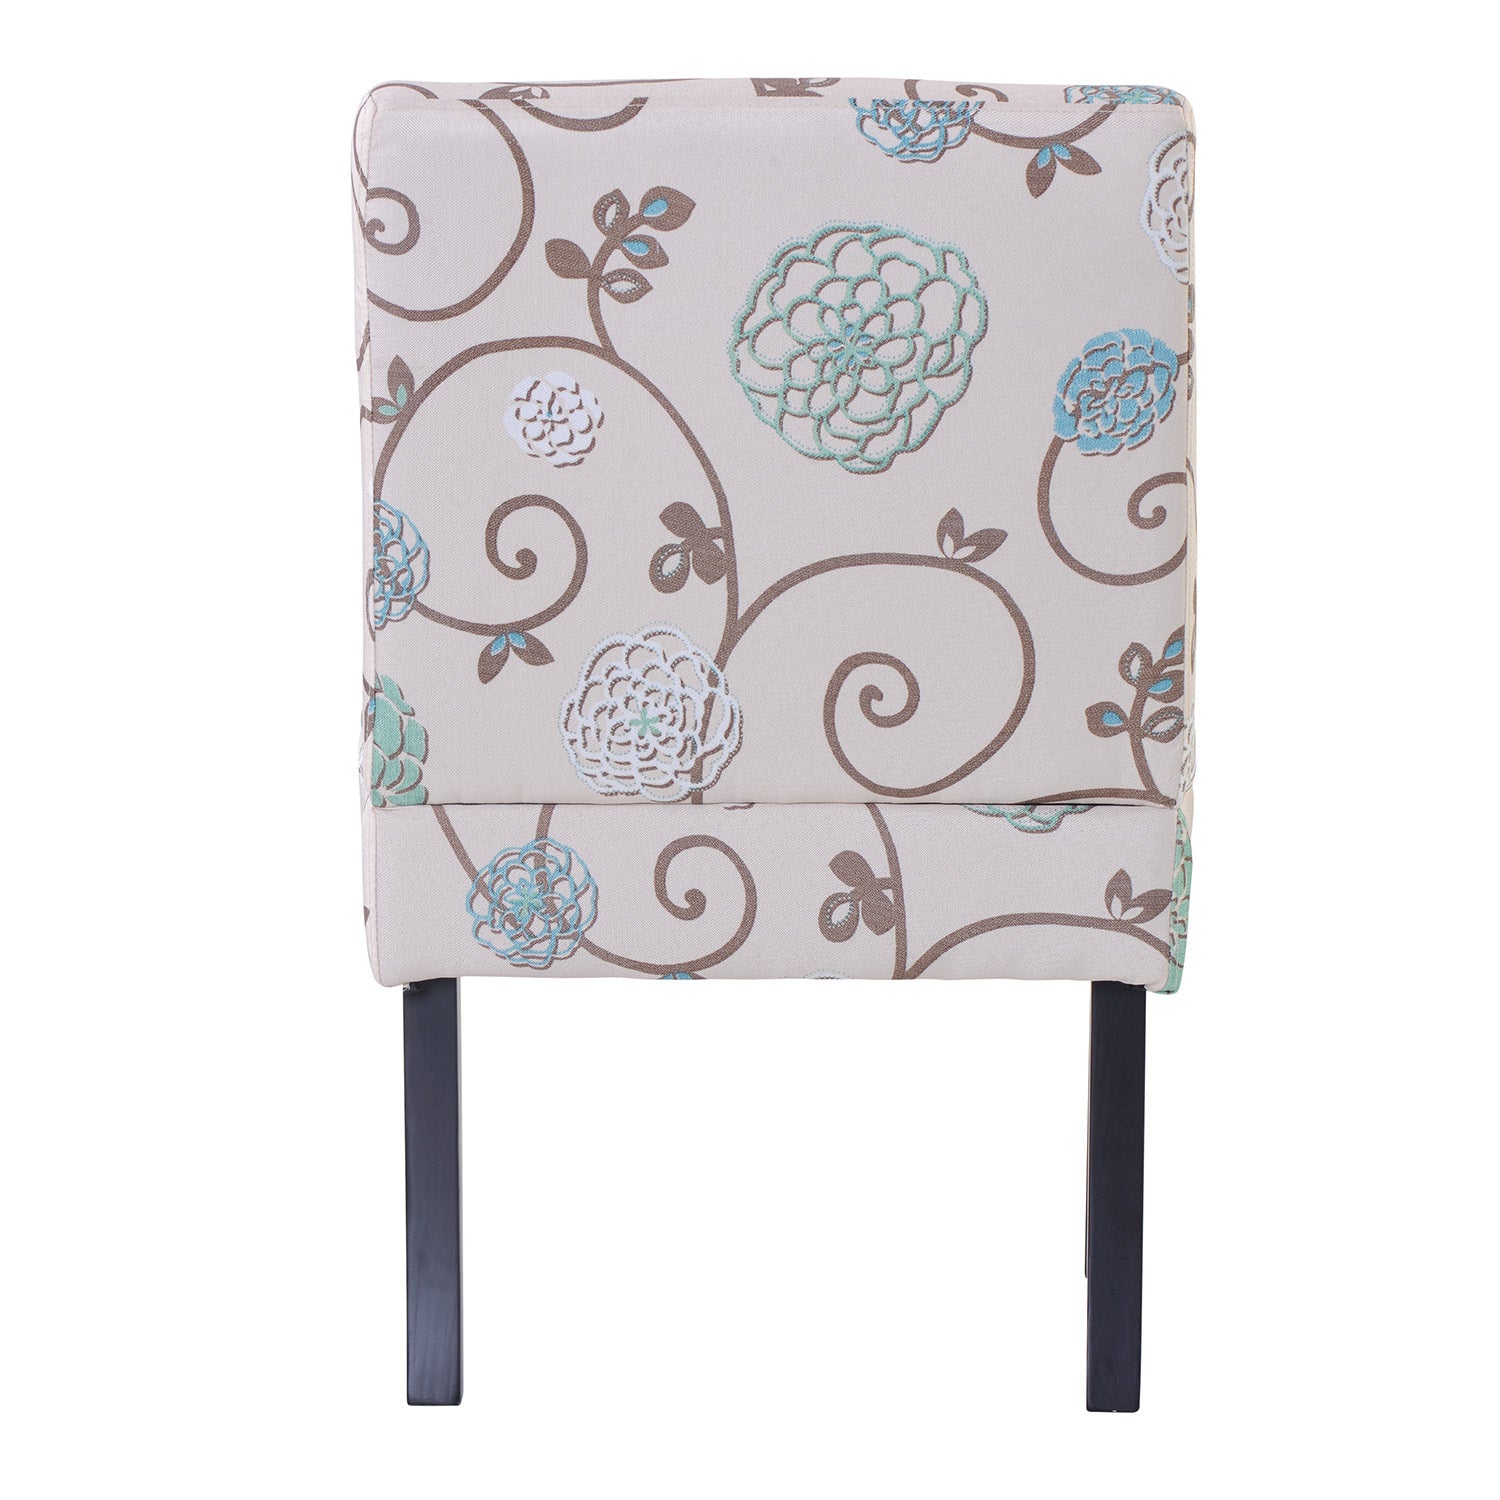 Ivy Set of 2 Beige Floral Pattern Accent Chairs